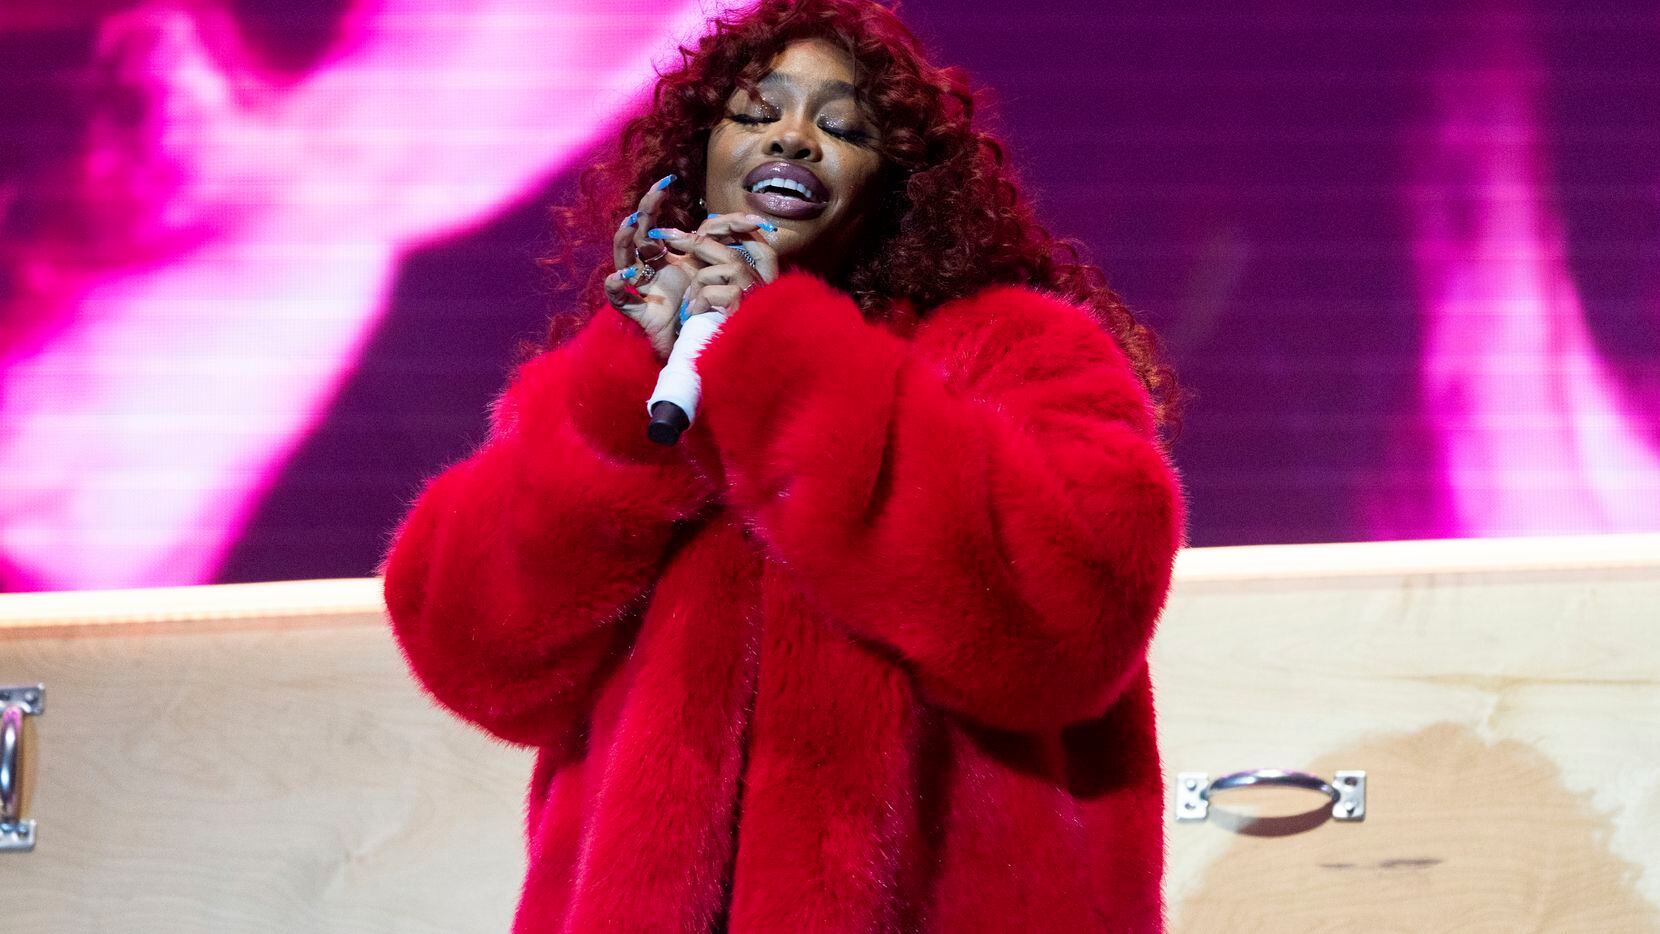 New Jersey singer-songwriter SZA will perform March 10 at the American Airlines Center in...